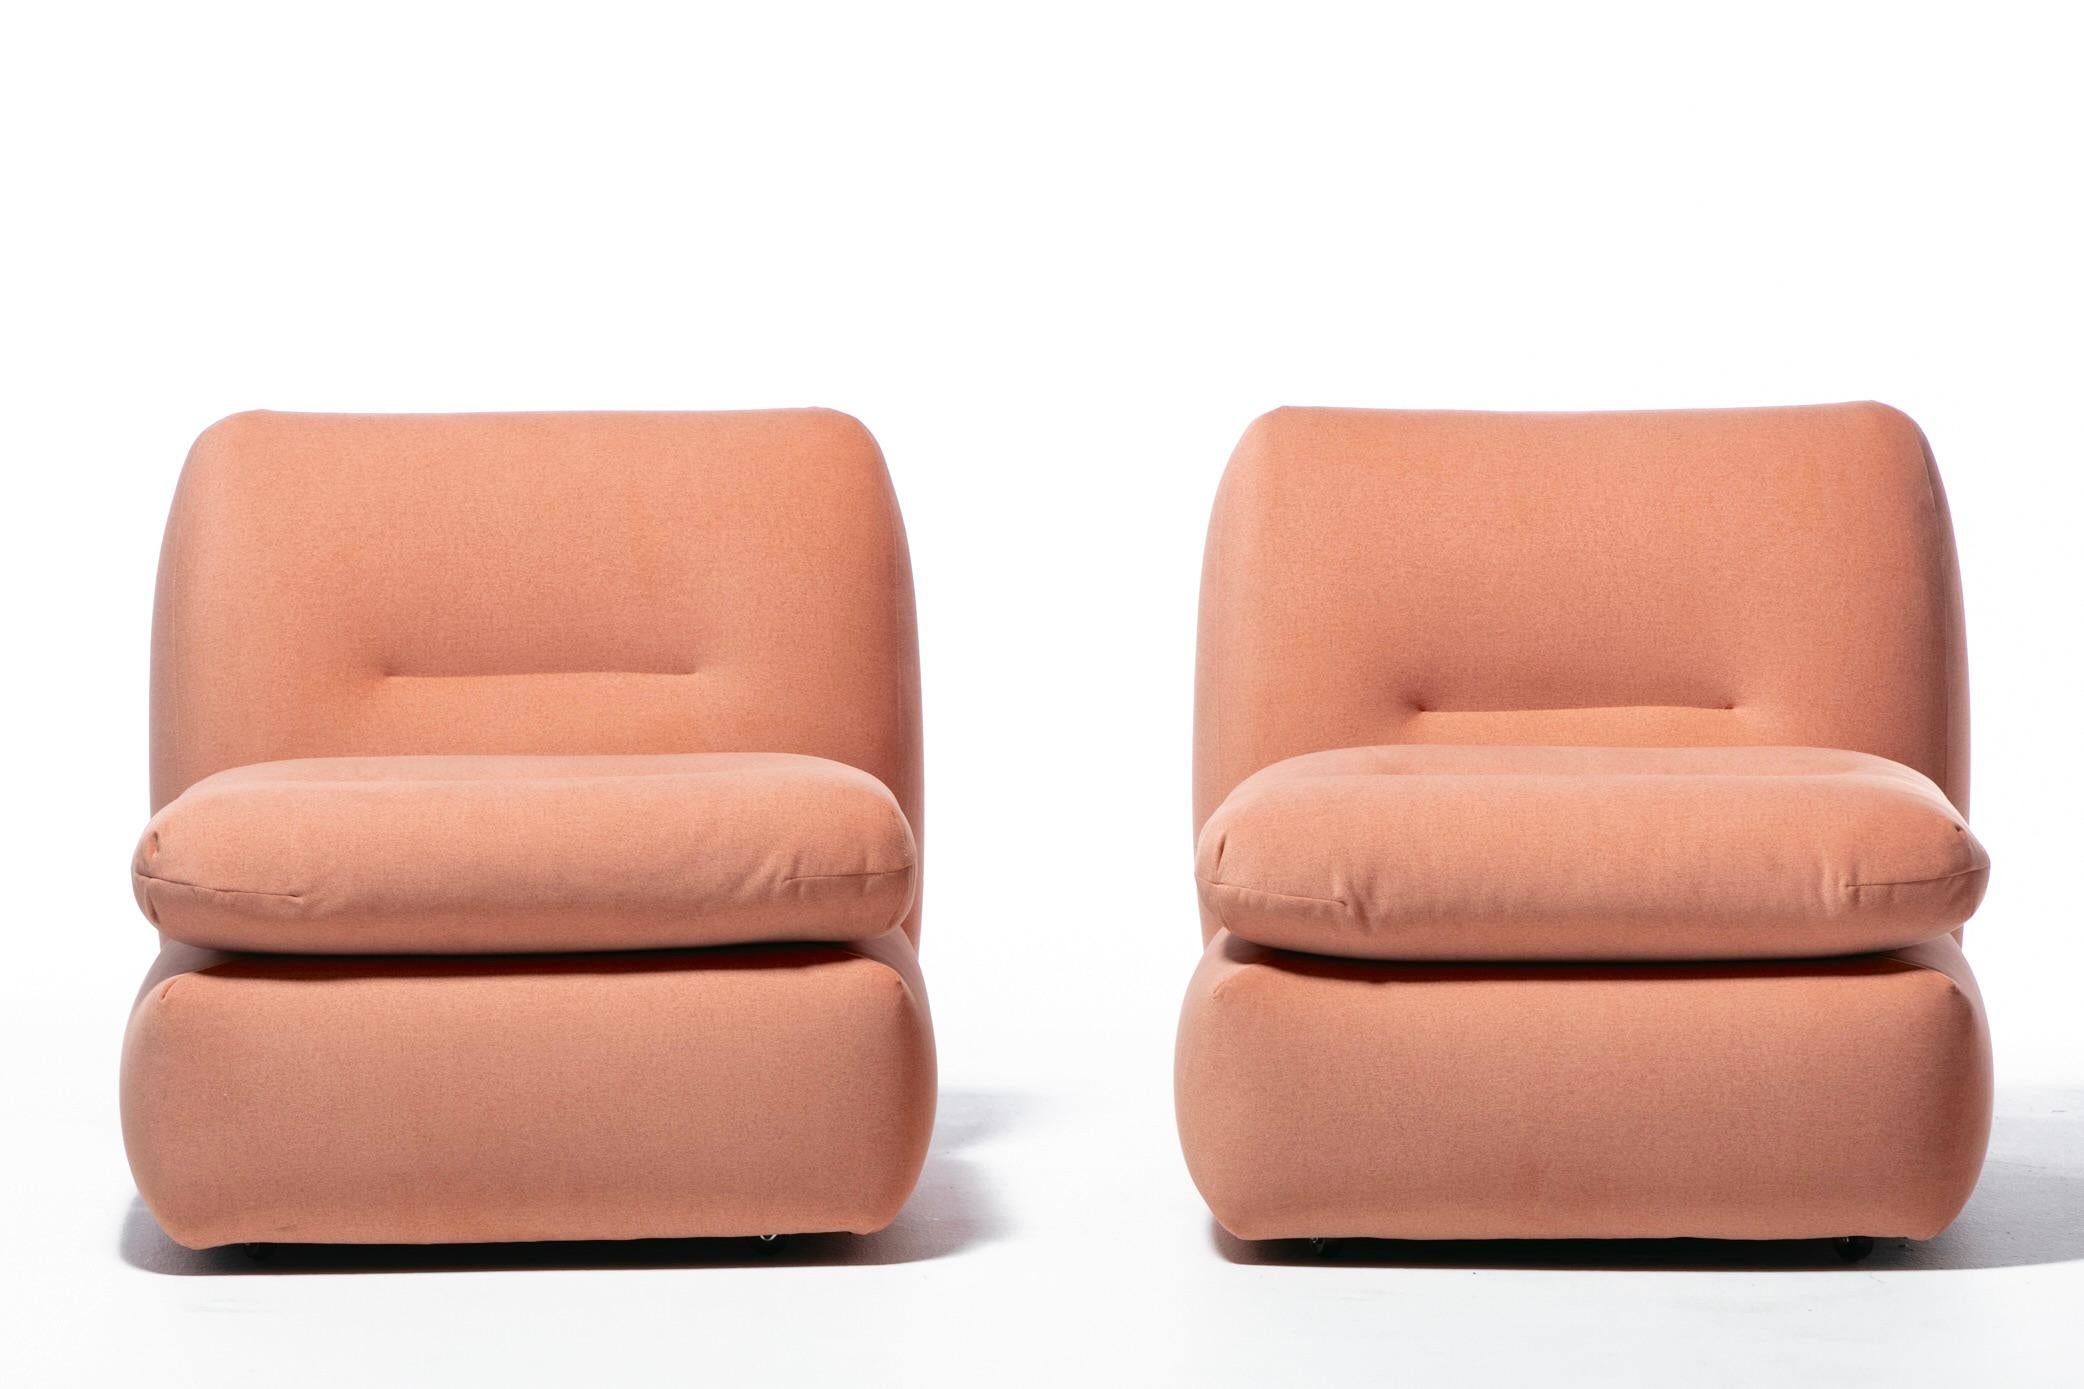 Pair of 1970s Italian Mario Bellini Style Slipper Chairs in Blush Pink Fabric In Good Condition For Sale In Saint Louis, MO